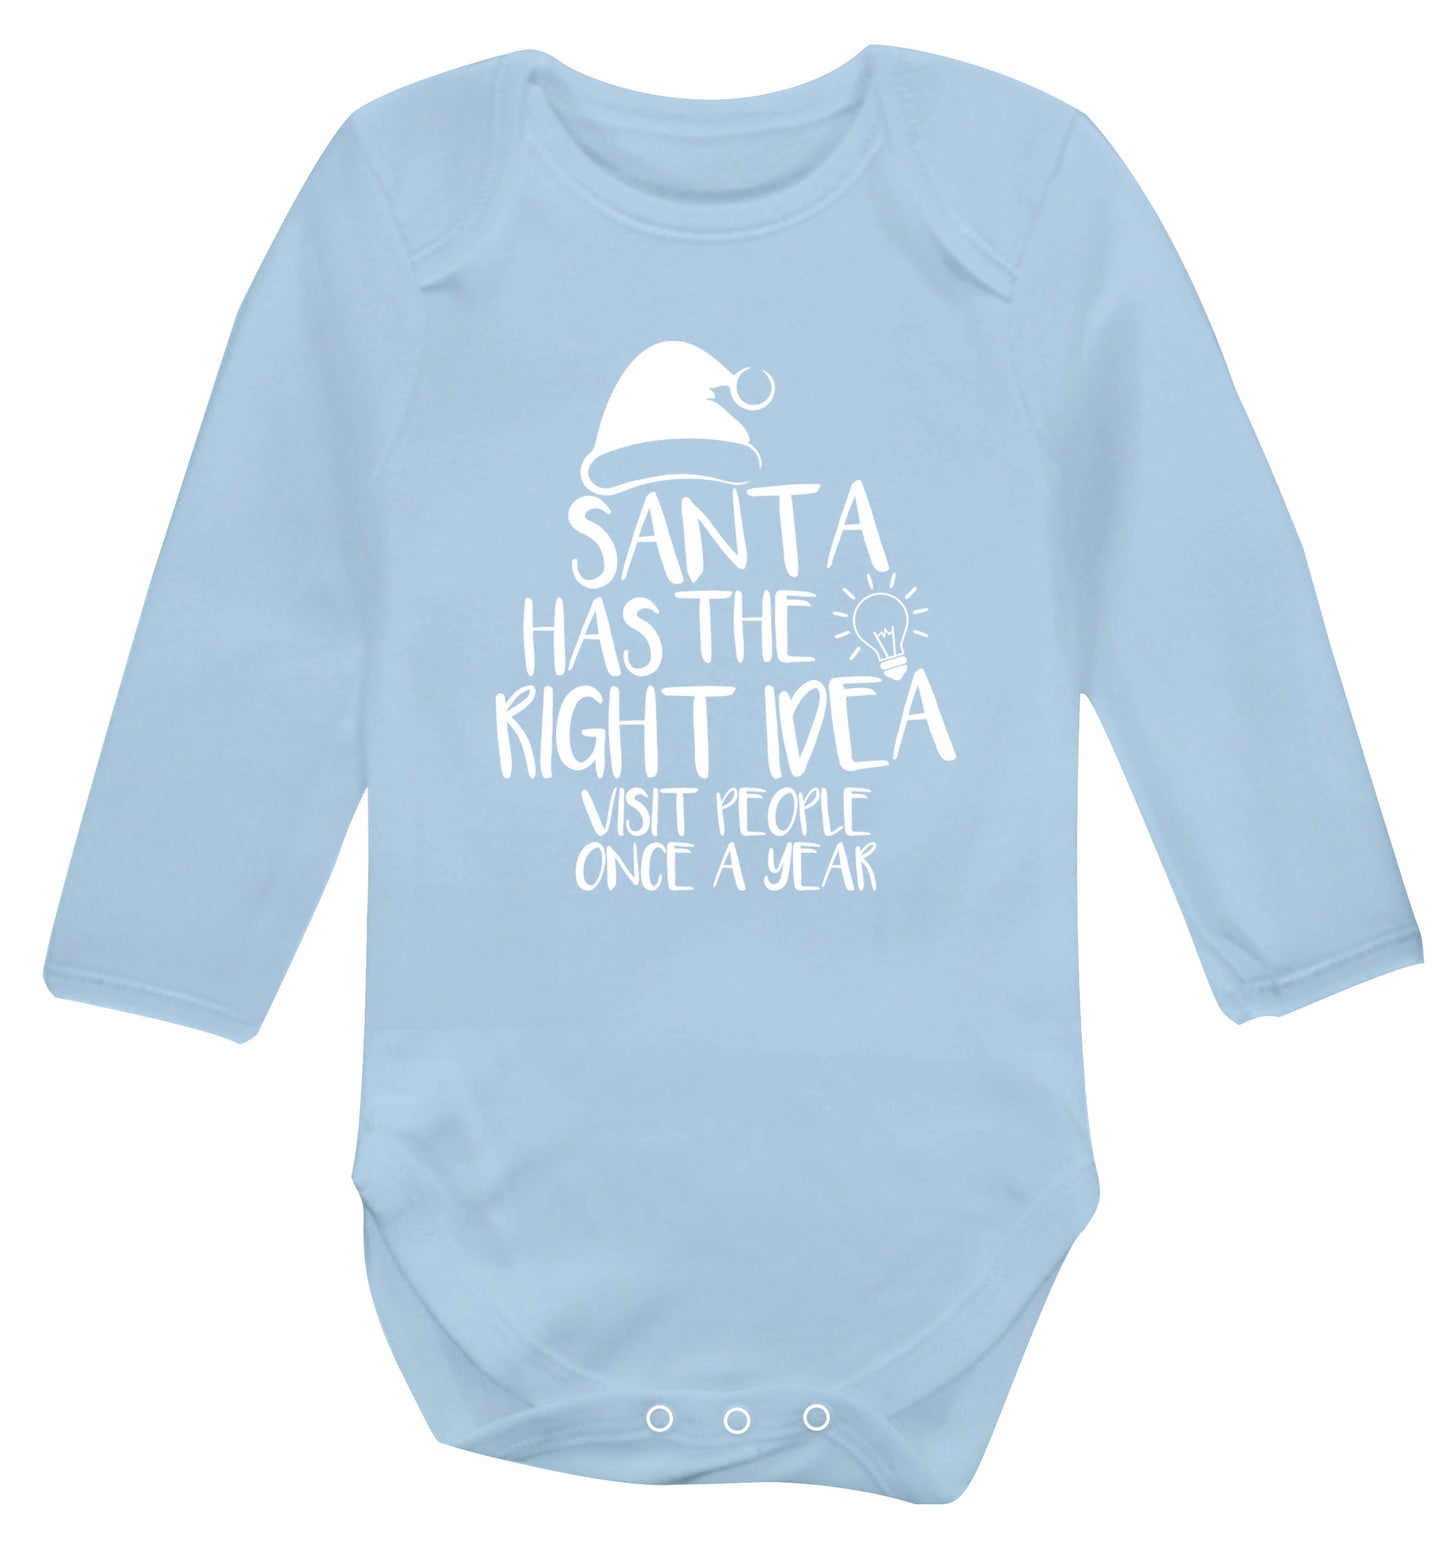 Santa has the right idea visit people once a year Baby Vest long sleeved pale blue 6-12 months